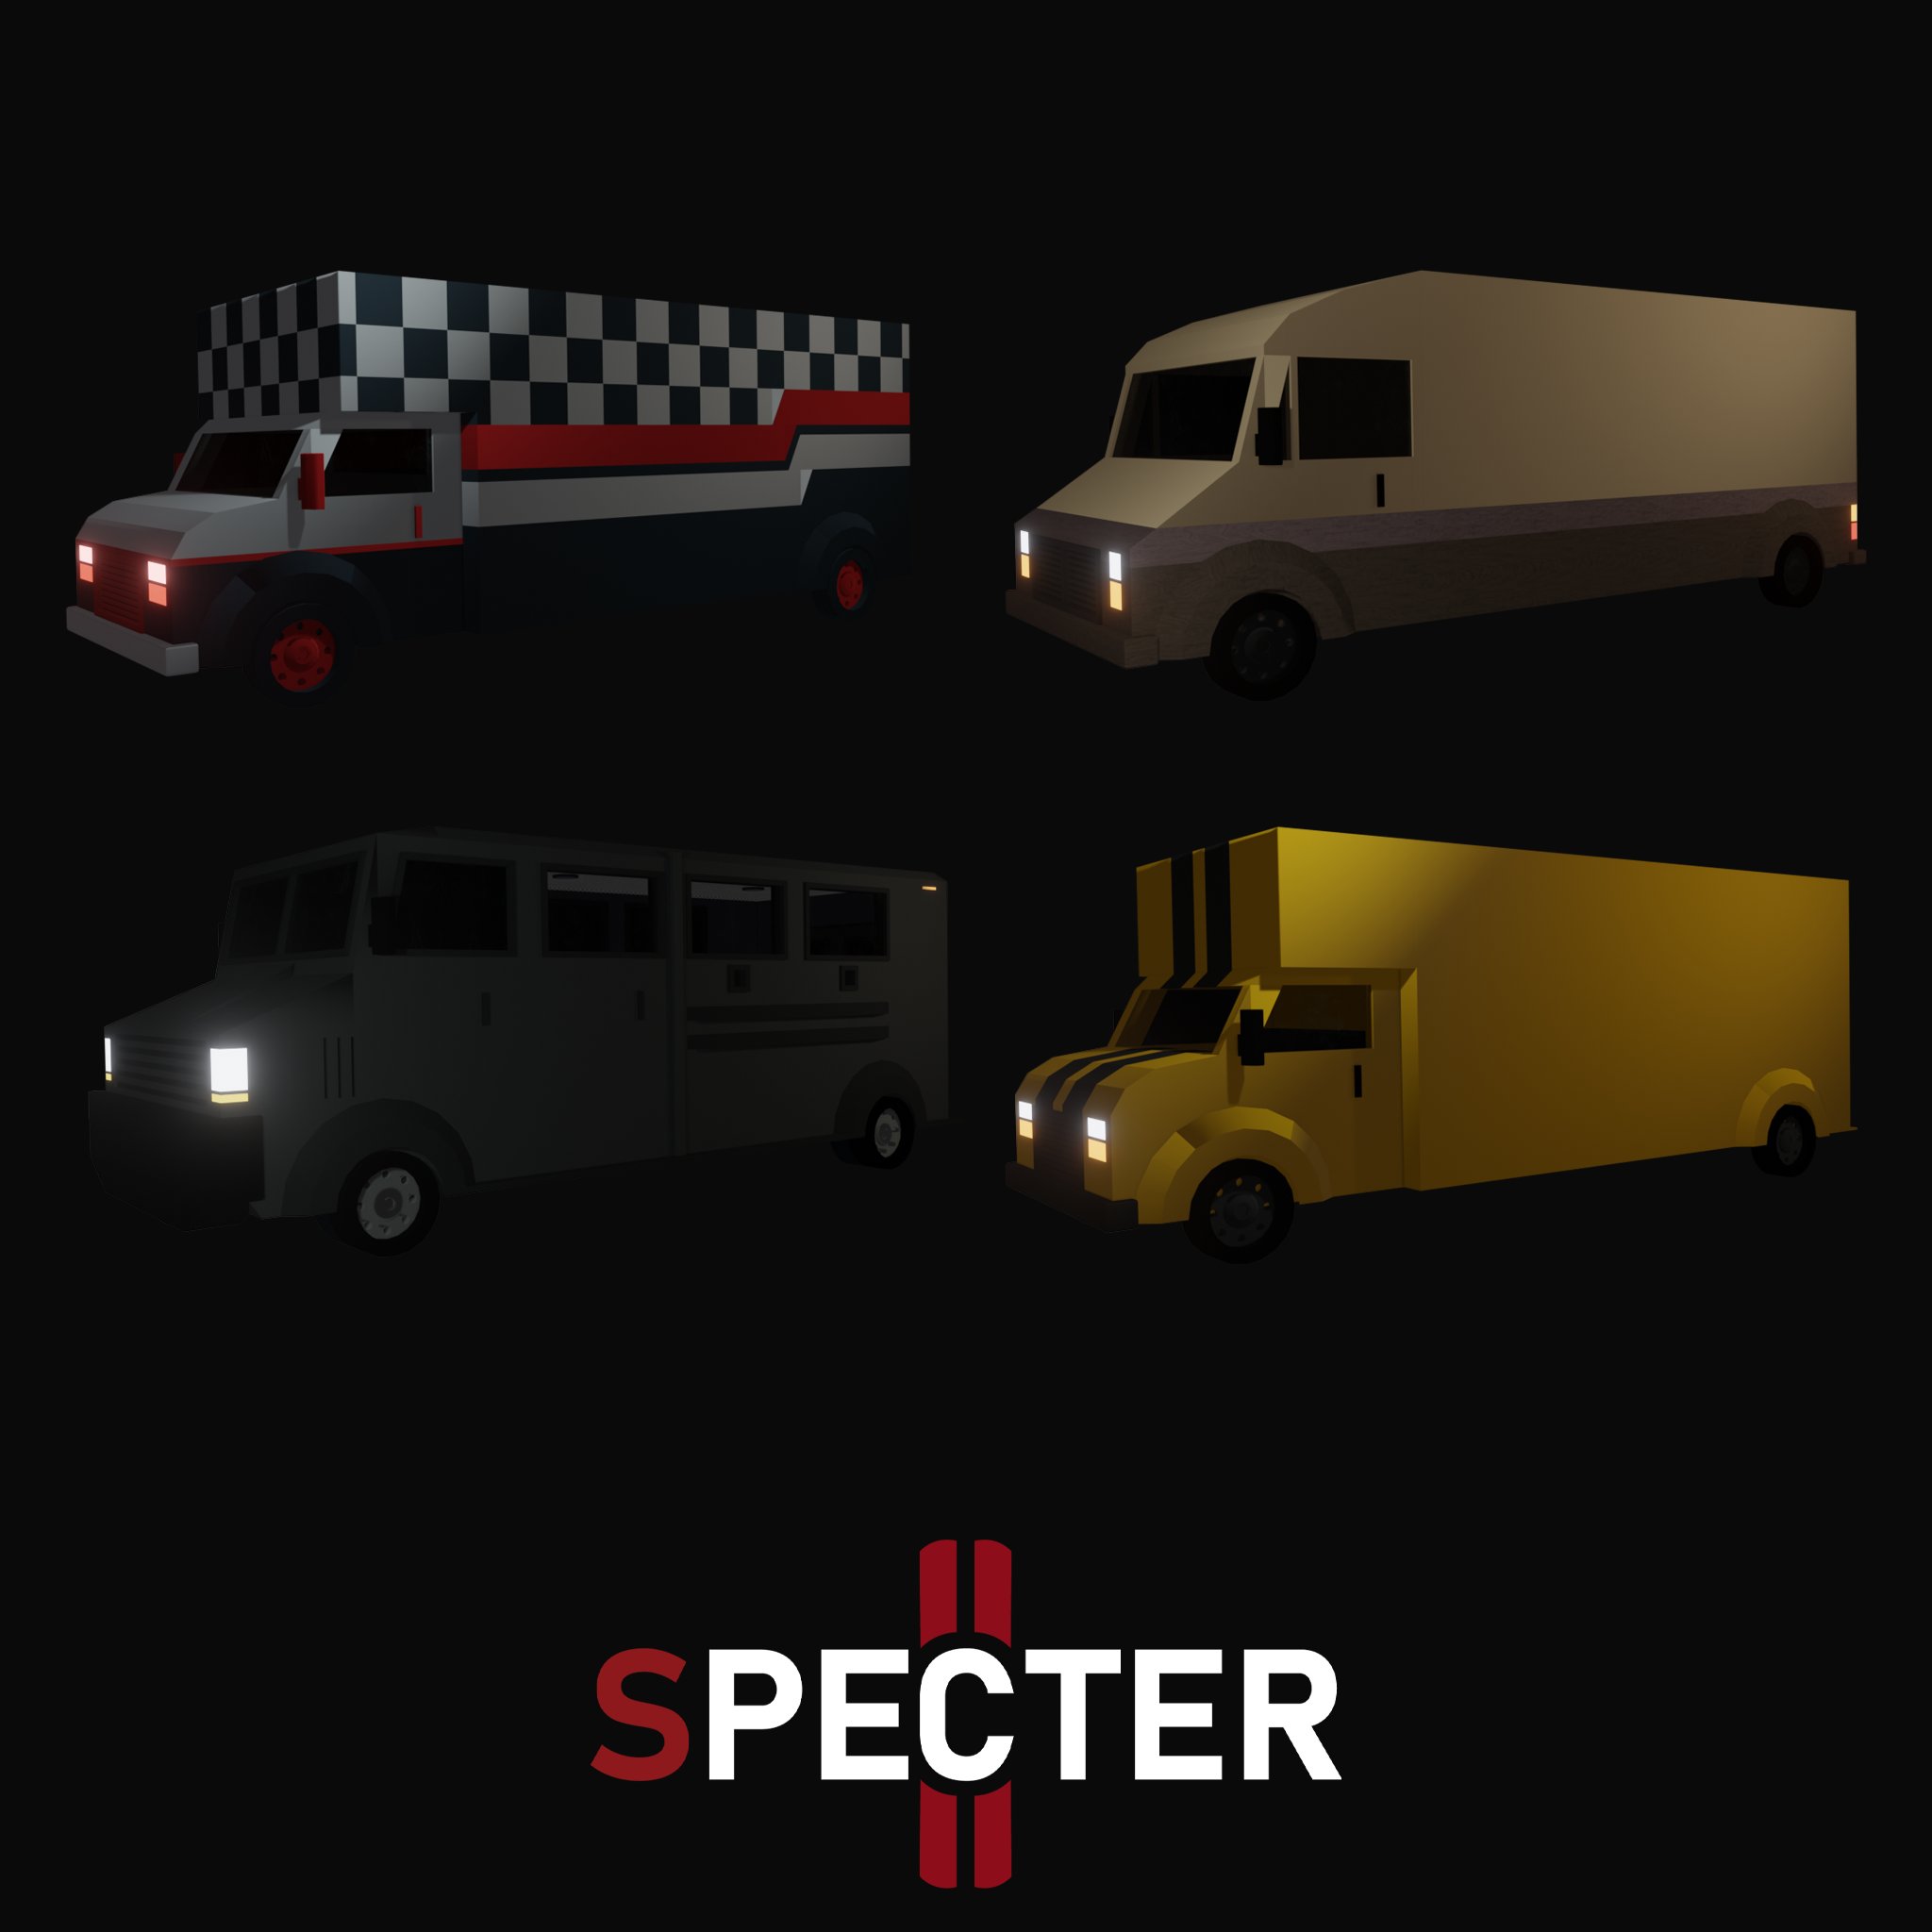 Periodic Games on X: Some #Specter2 cosmetics, van skins, and character  outfits. There are 5 van variants, each with its own skins! We are  releasing this month, date coming ASAP.👻 #Roblox #RobloxDev